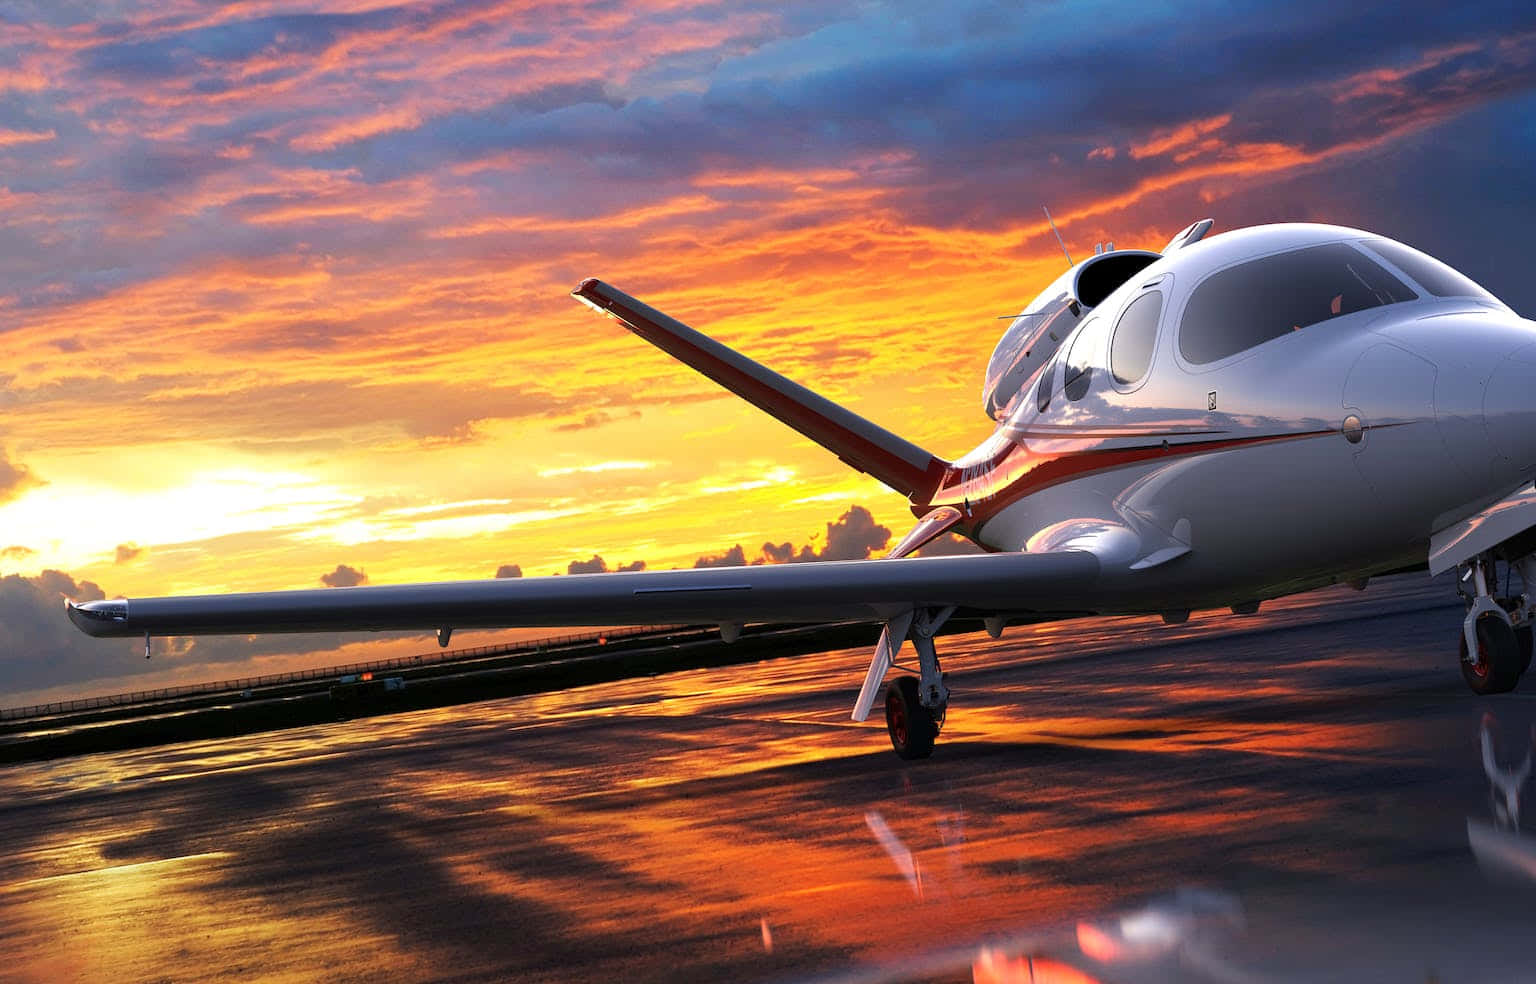 Cirrus Vision SF50 Lille Fly Ved Solnedgang Wallpaper